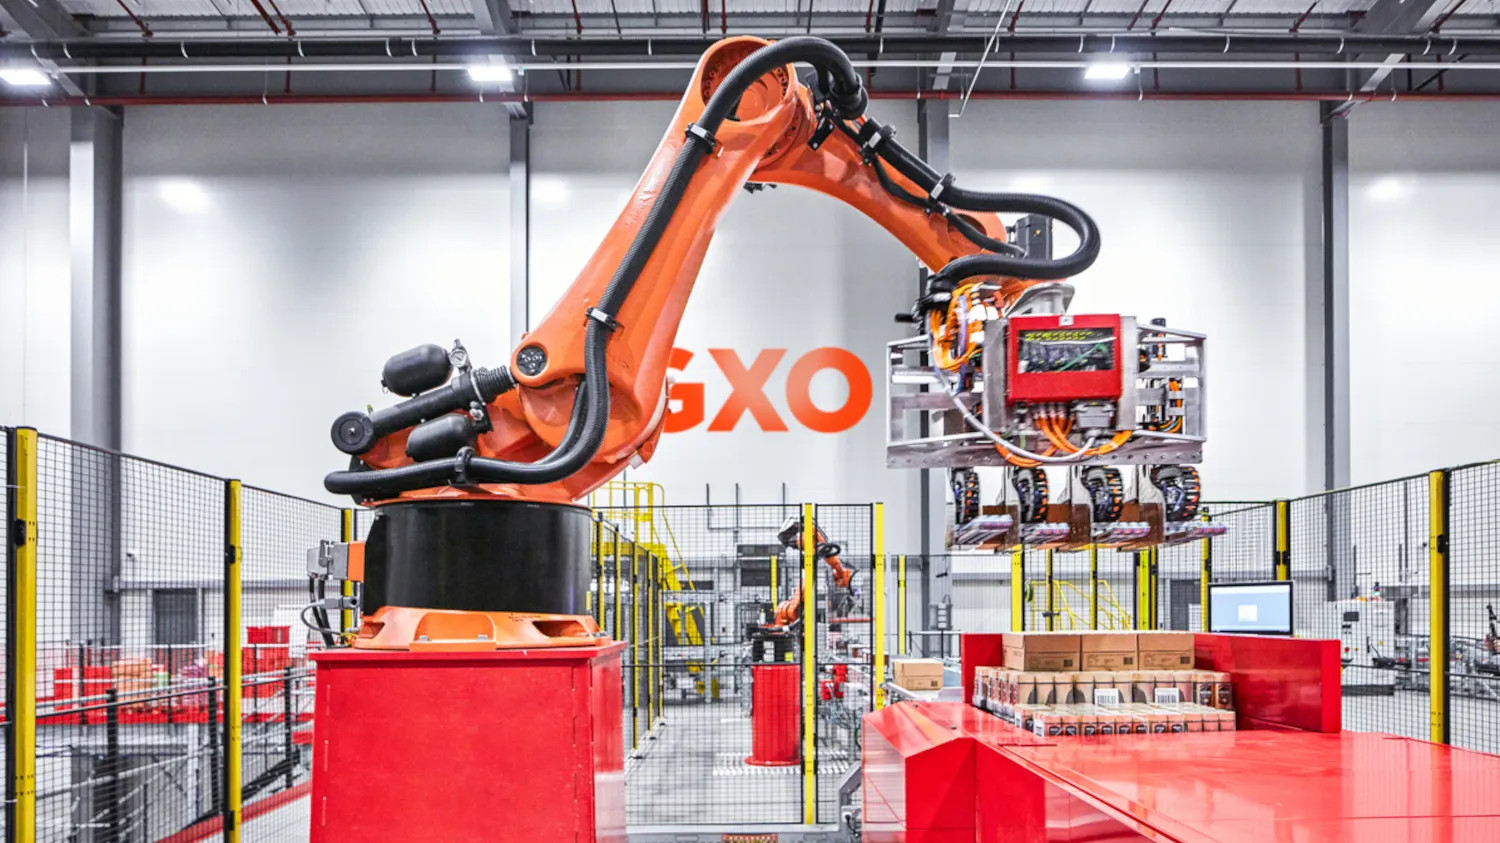 GXO robot arm in warehouse setting